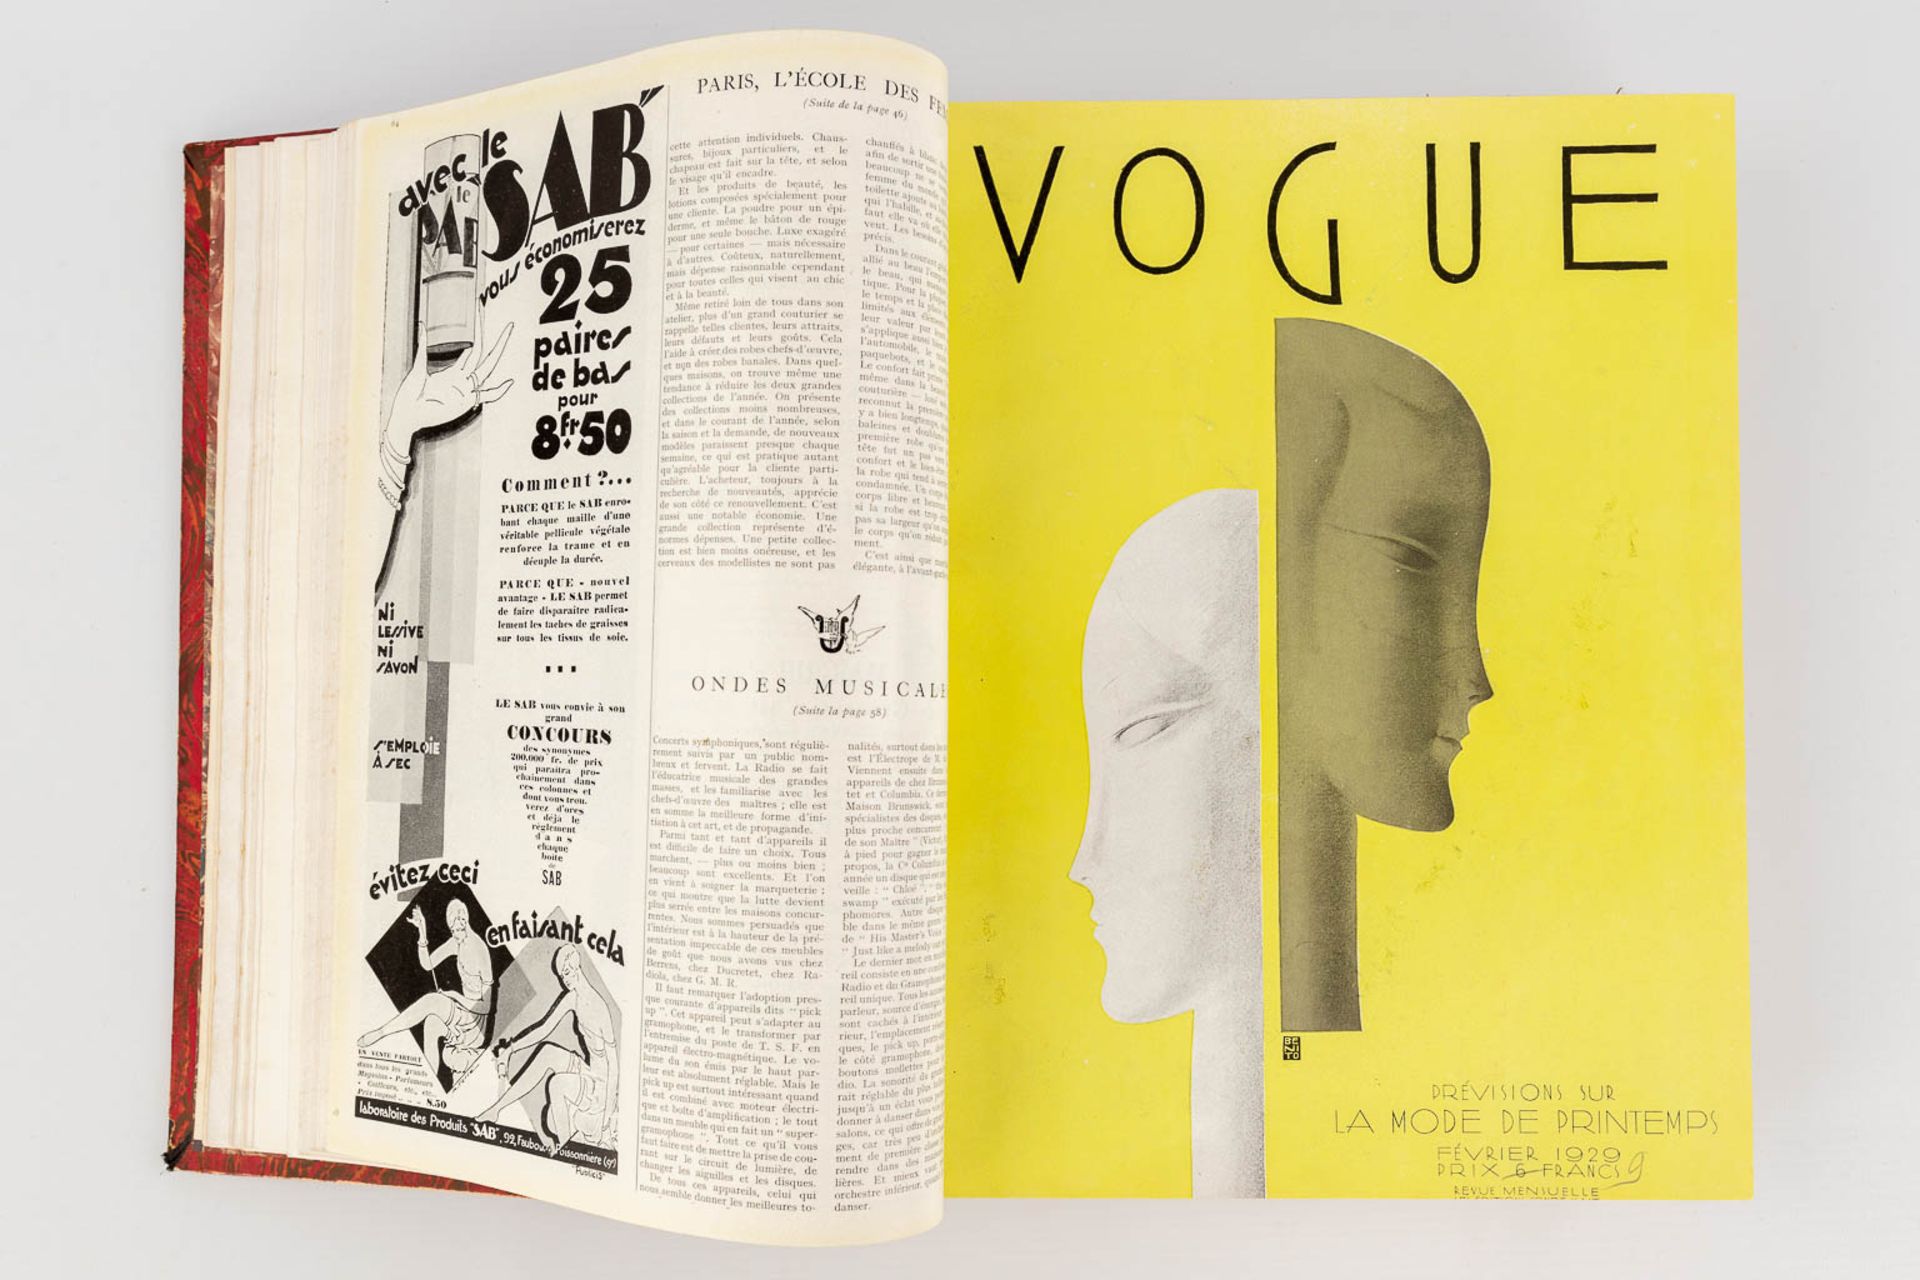 An assembled book with the Vogue magazine, 1929. (L: 5 x W: 25,5 x H: 31,5 cm) - Image 4 of 18